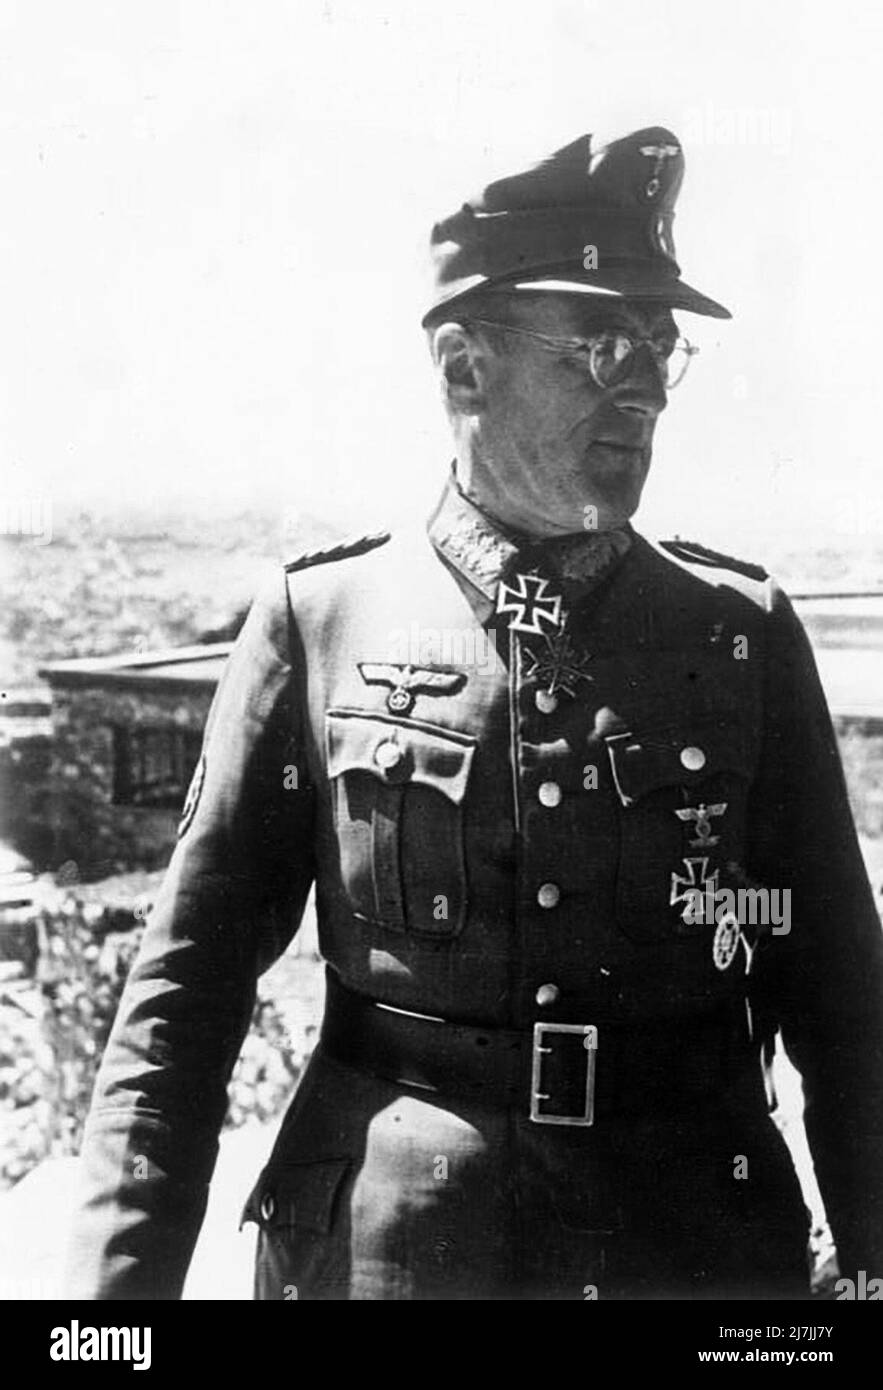 Ferdinand Schörner was a German military commander who held the rank of Generalfeldmarschall in the Wehrmacht of Nazi Germany during World War II. He commanded several army groups and was the last Commander-in-chief of the German Army. Stock Photo